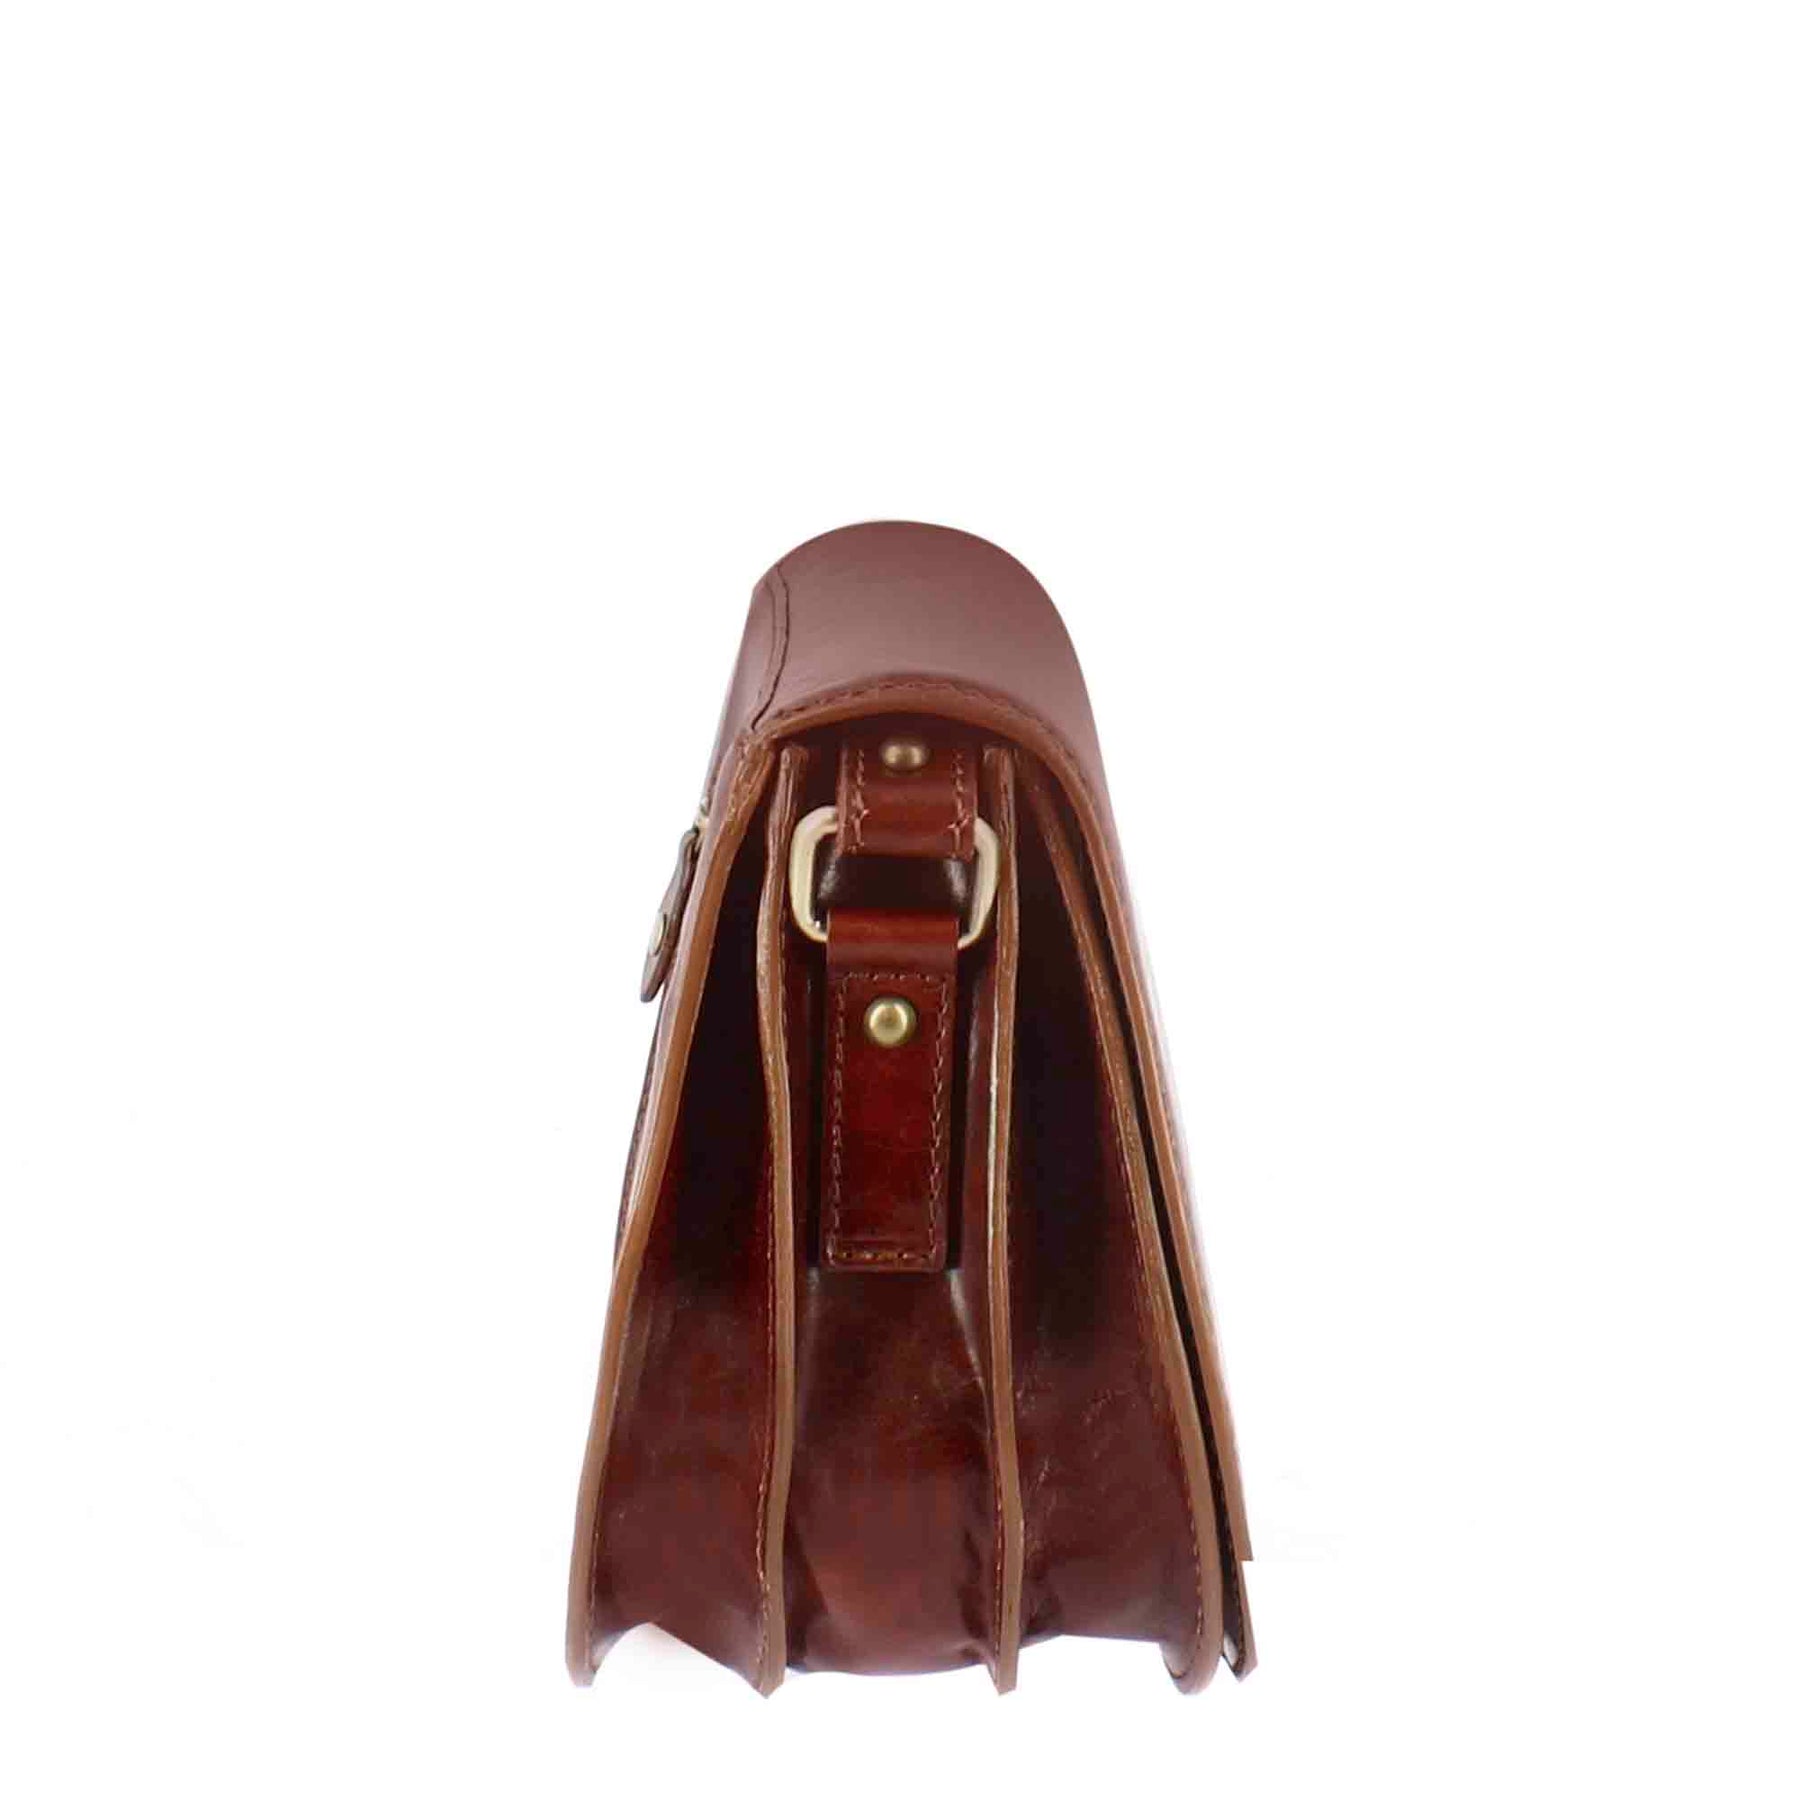 Essential women's bag in dark brown smooth leather